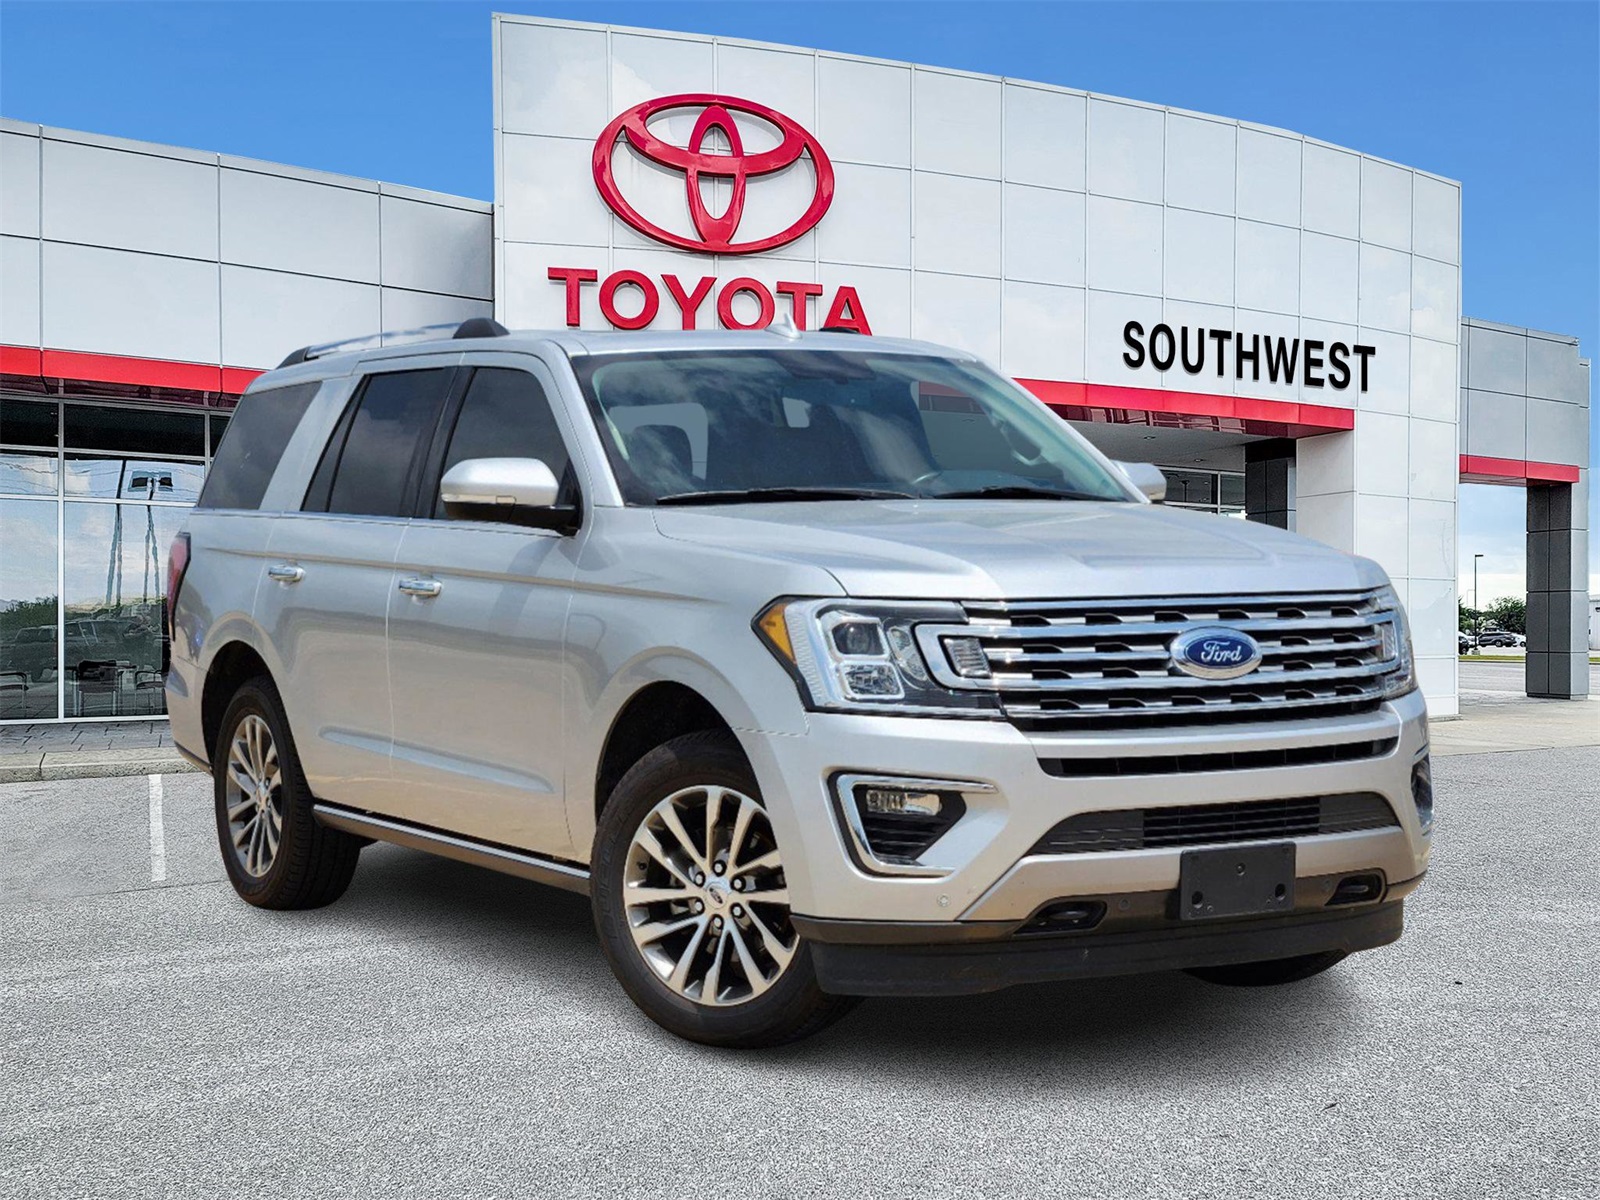 2018 Ford Expedition Hudson Oaks TX